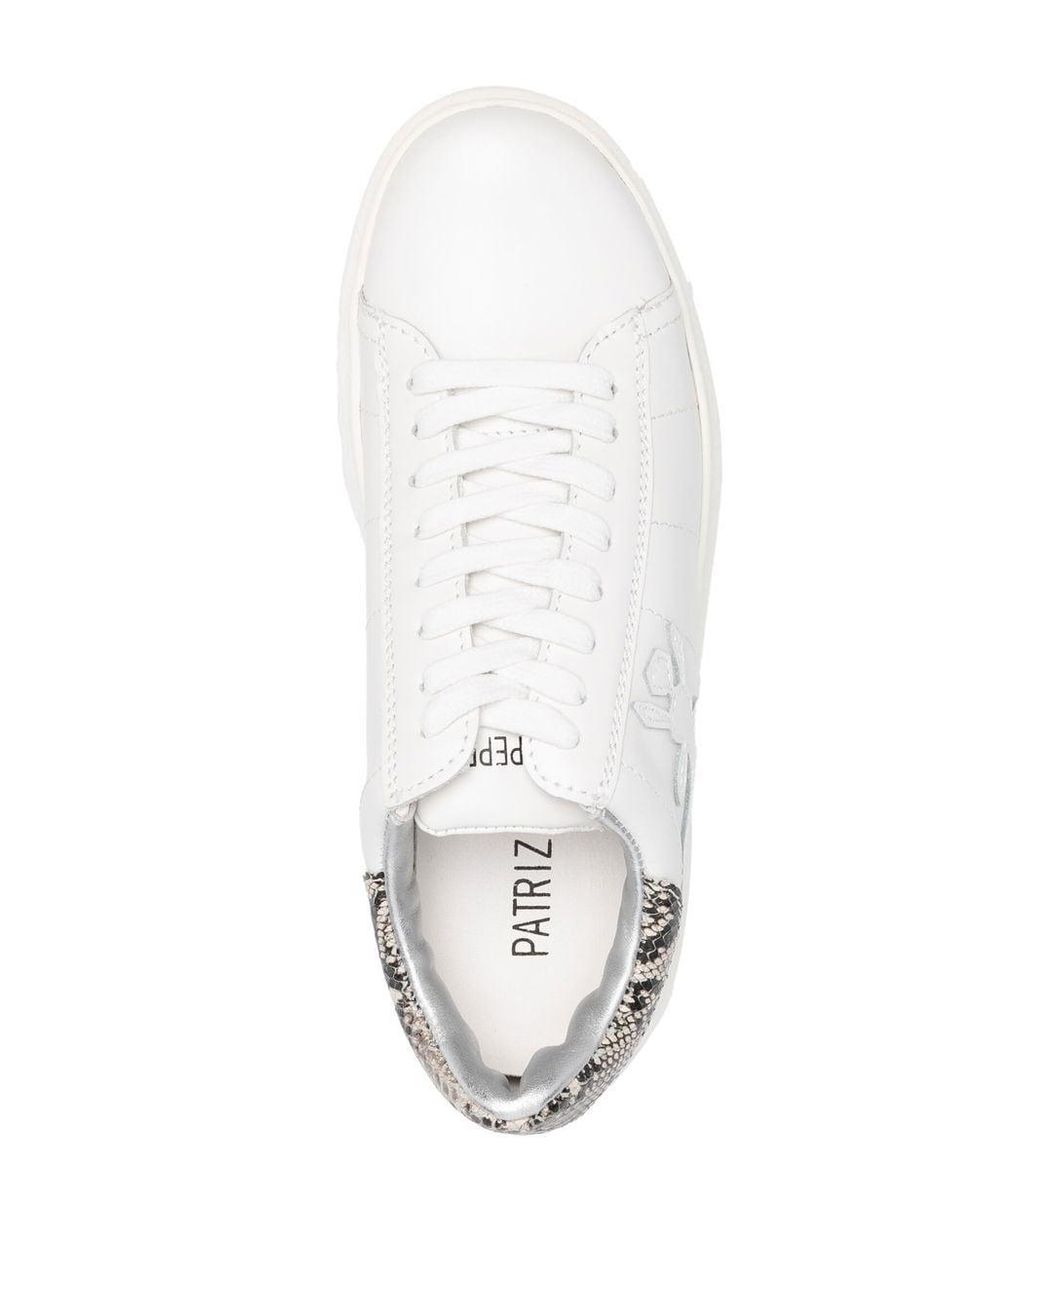 Patrizia Pepe Lace-up Embossed Sneakers in White | Lyst